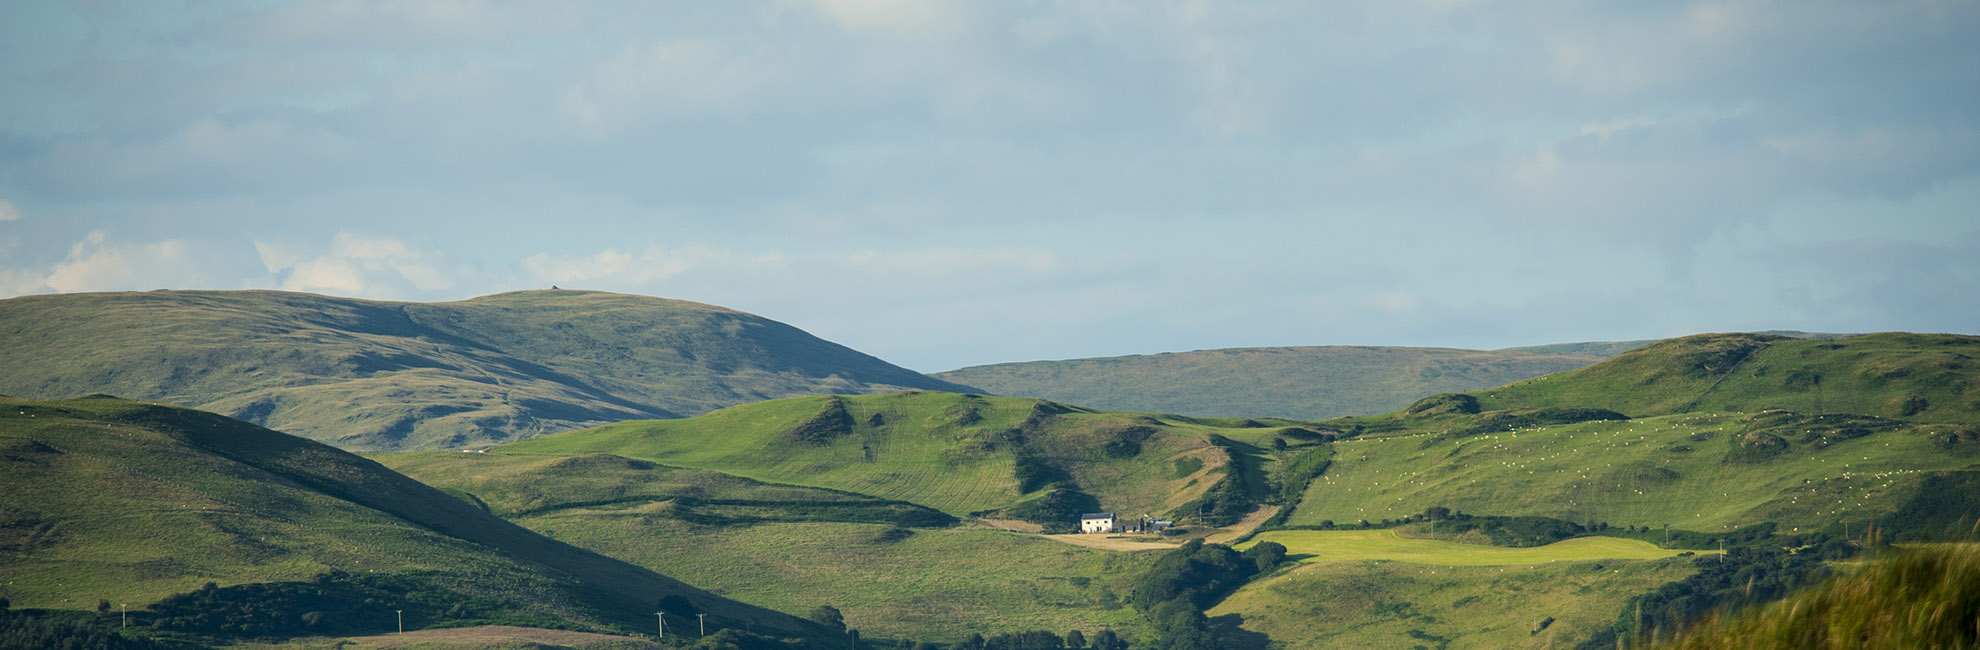 A landscape shot of rolling green hills in the Welsh countryside